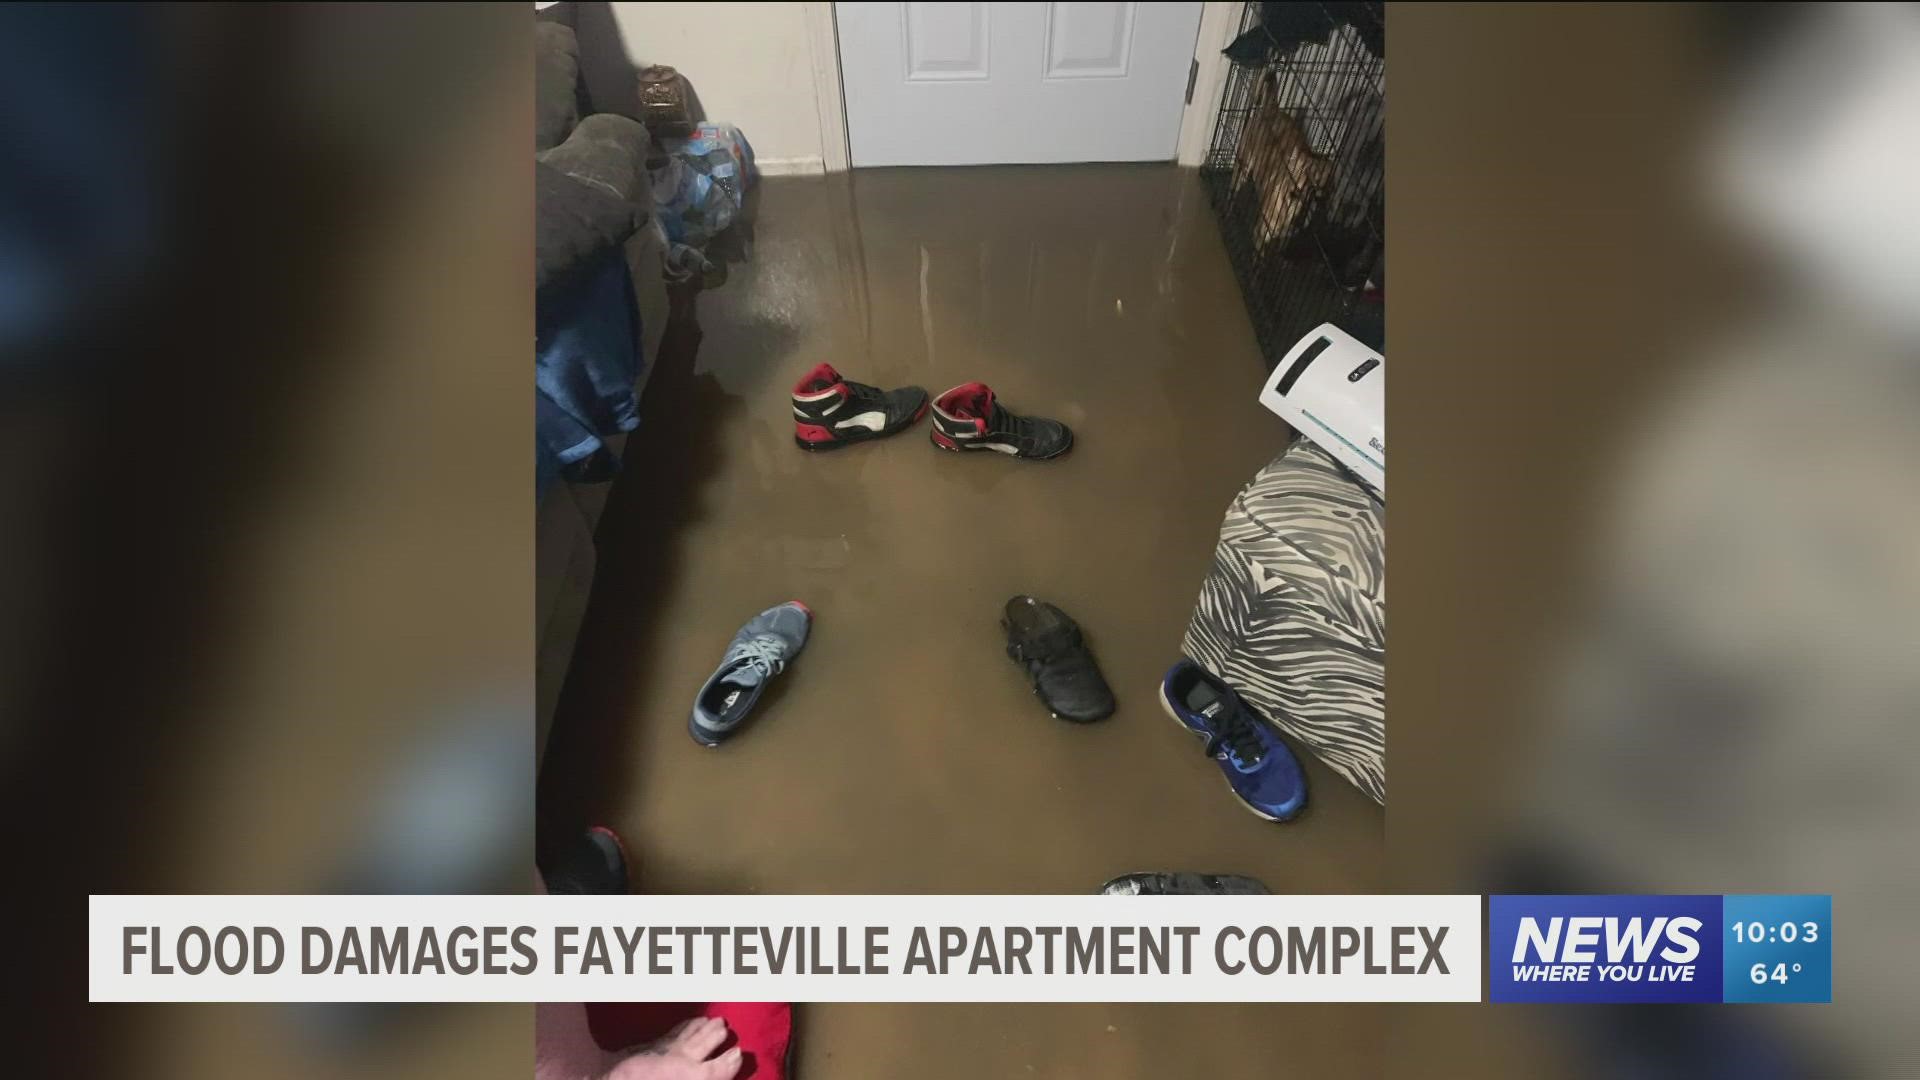 Management at the West End Apartment complex in Fayetteville says the apartments that were flooded out Thursday morning can no longer house tenants.